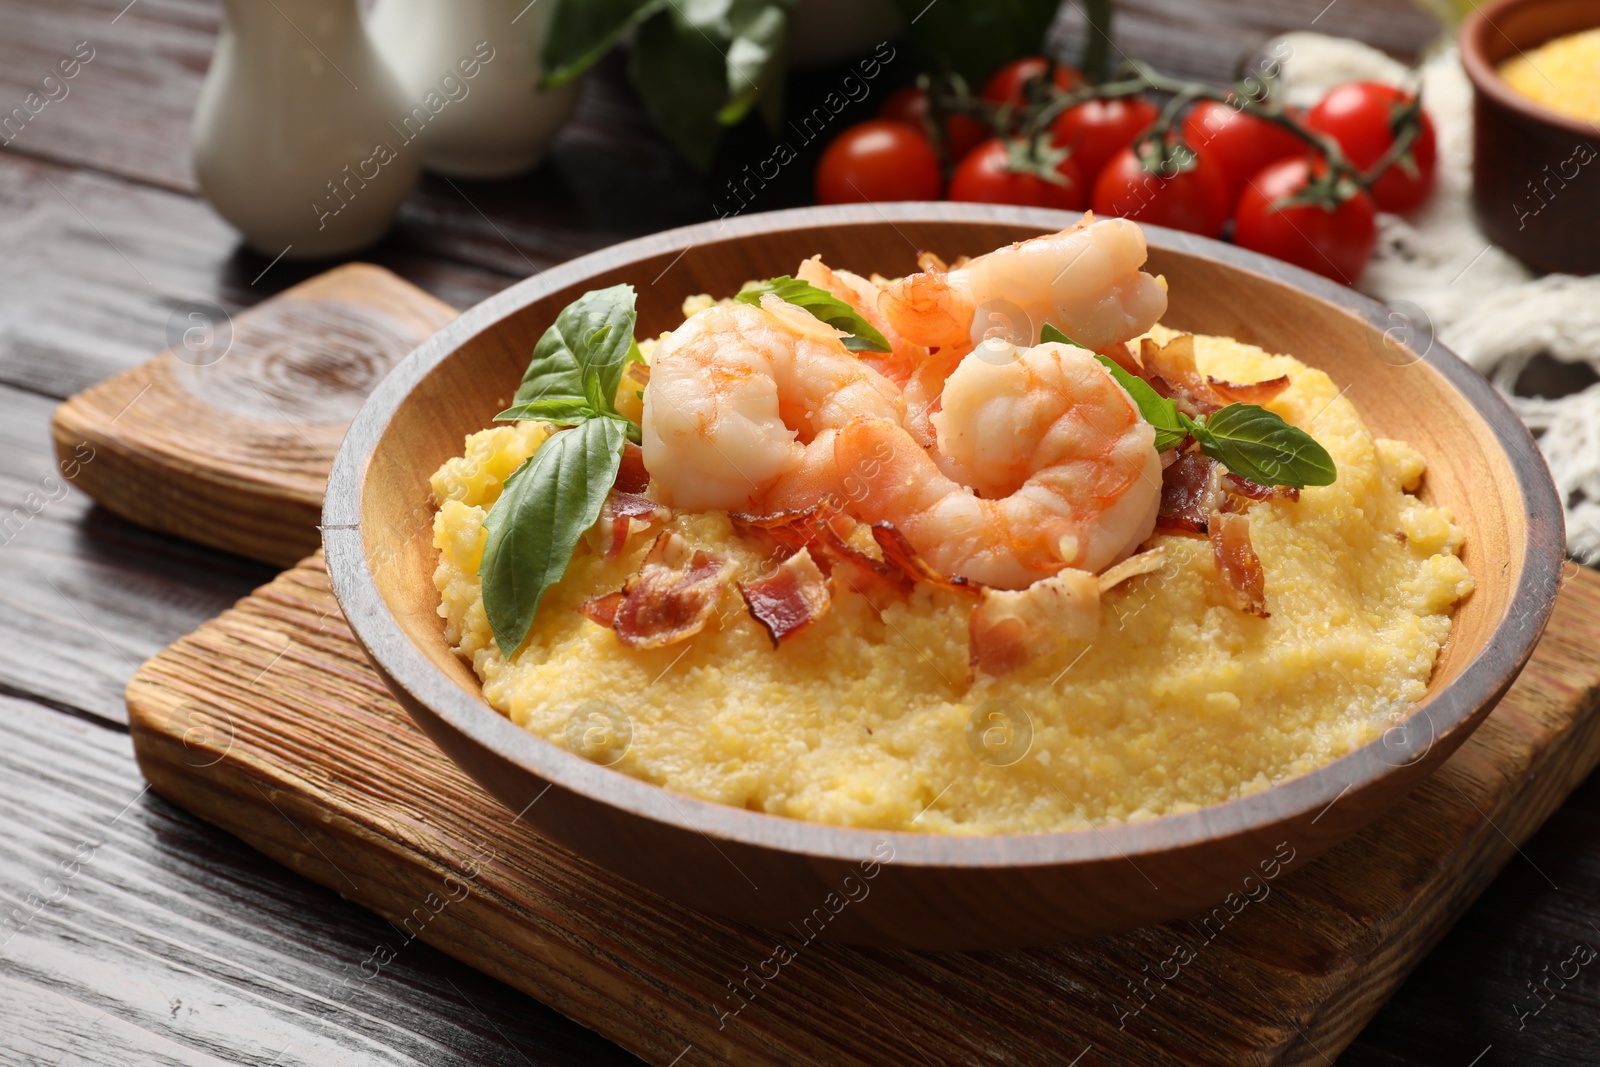 Photo of Fresh tasty shrimps, bacon, grits and basil in bowl on wooden table, closeup